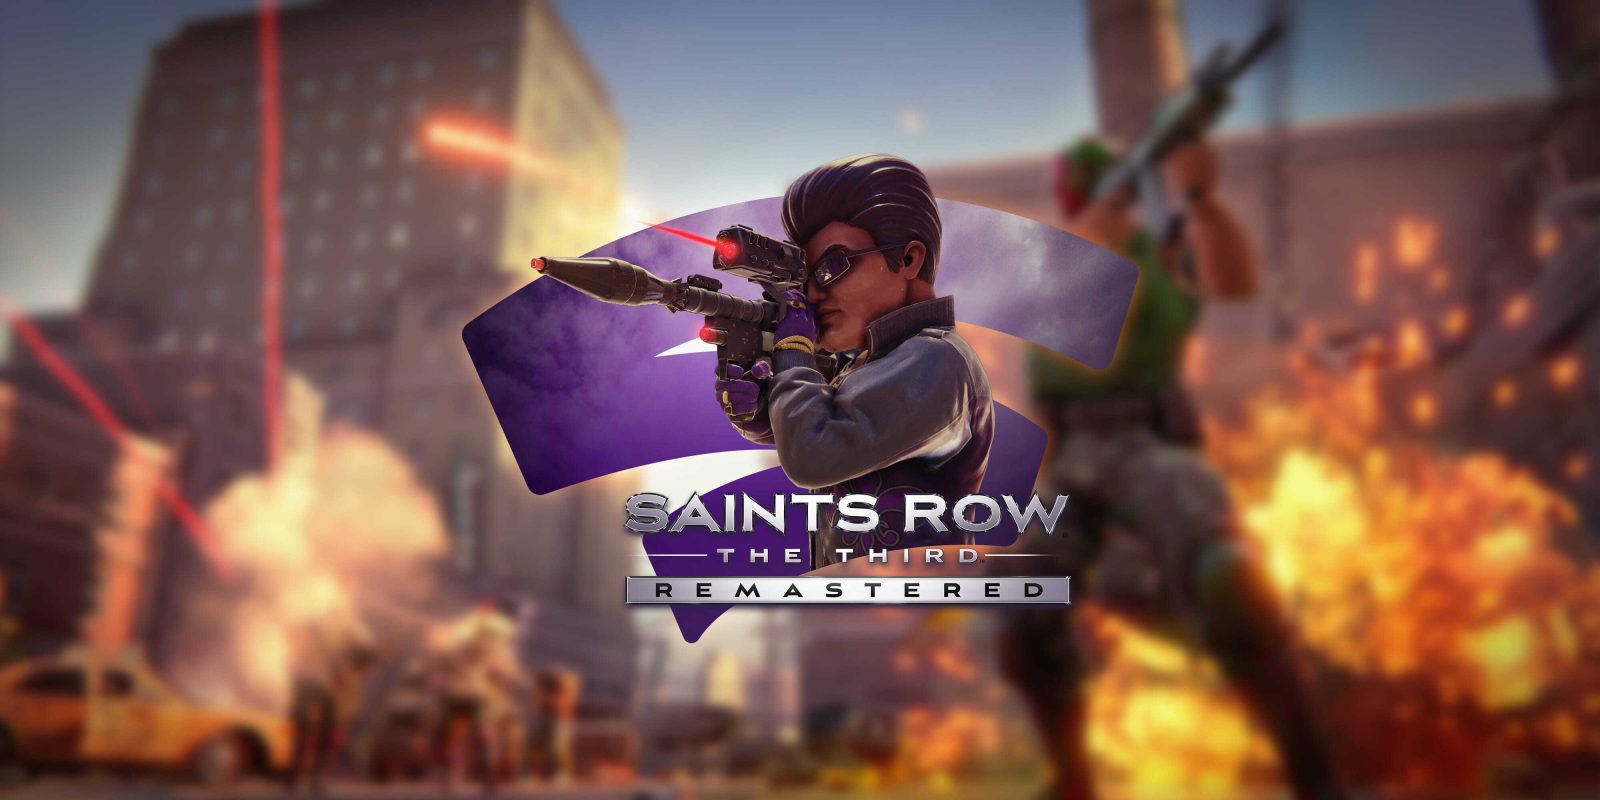 Saints Row: The Third Remastered for Google Stadia